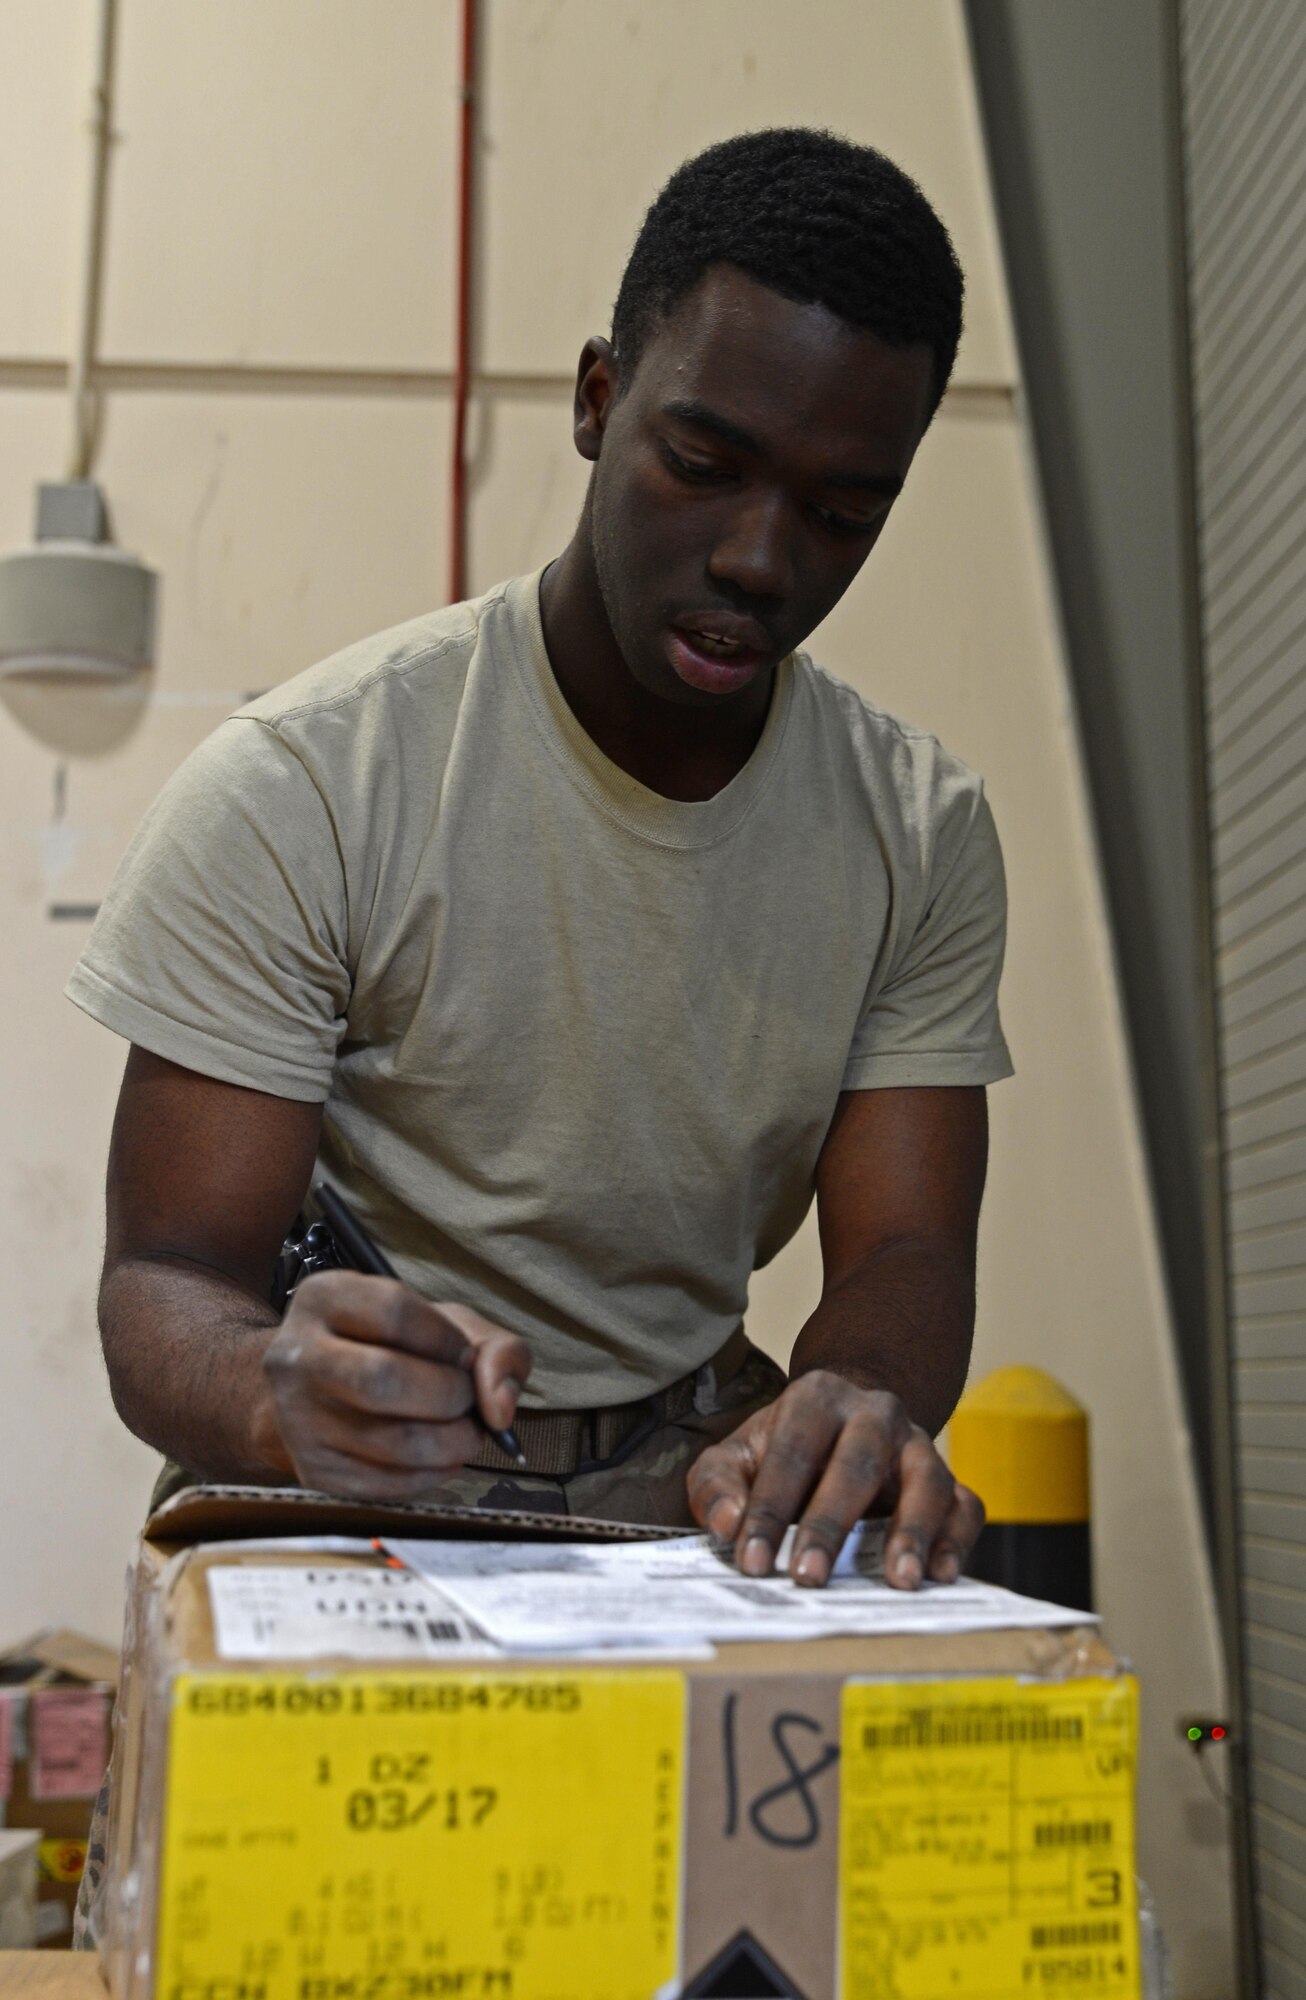 Airman 1st Class Trevis Pridgen, 455th Expeditionary Logistics Readiness Squadron traffic management journeyman, verifies the quantity of a product Nov. 4, 2017 at Bagram Airfield, Afghanistan.